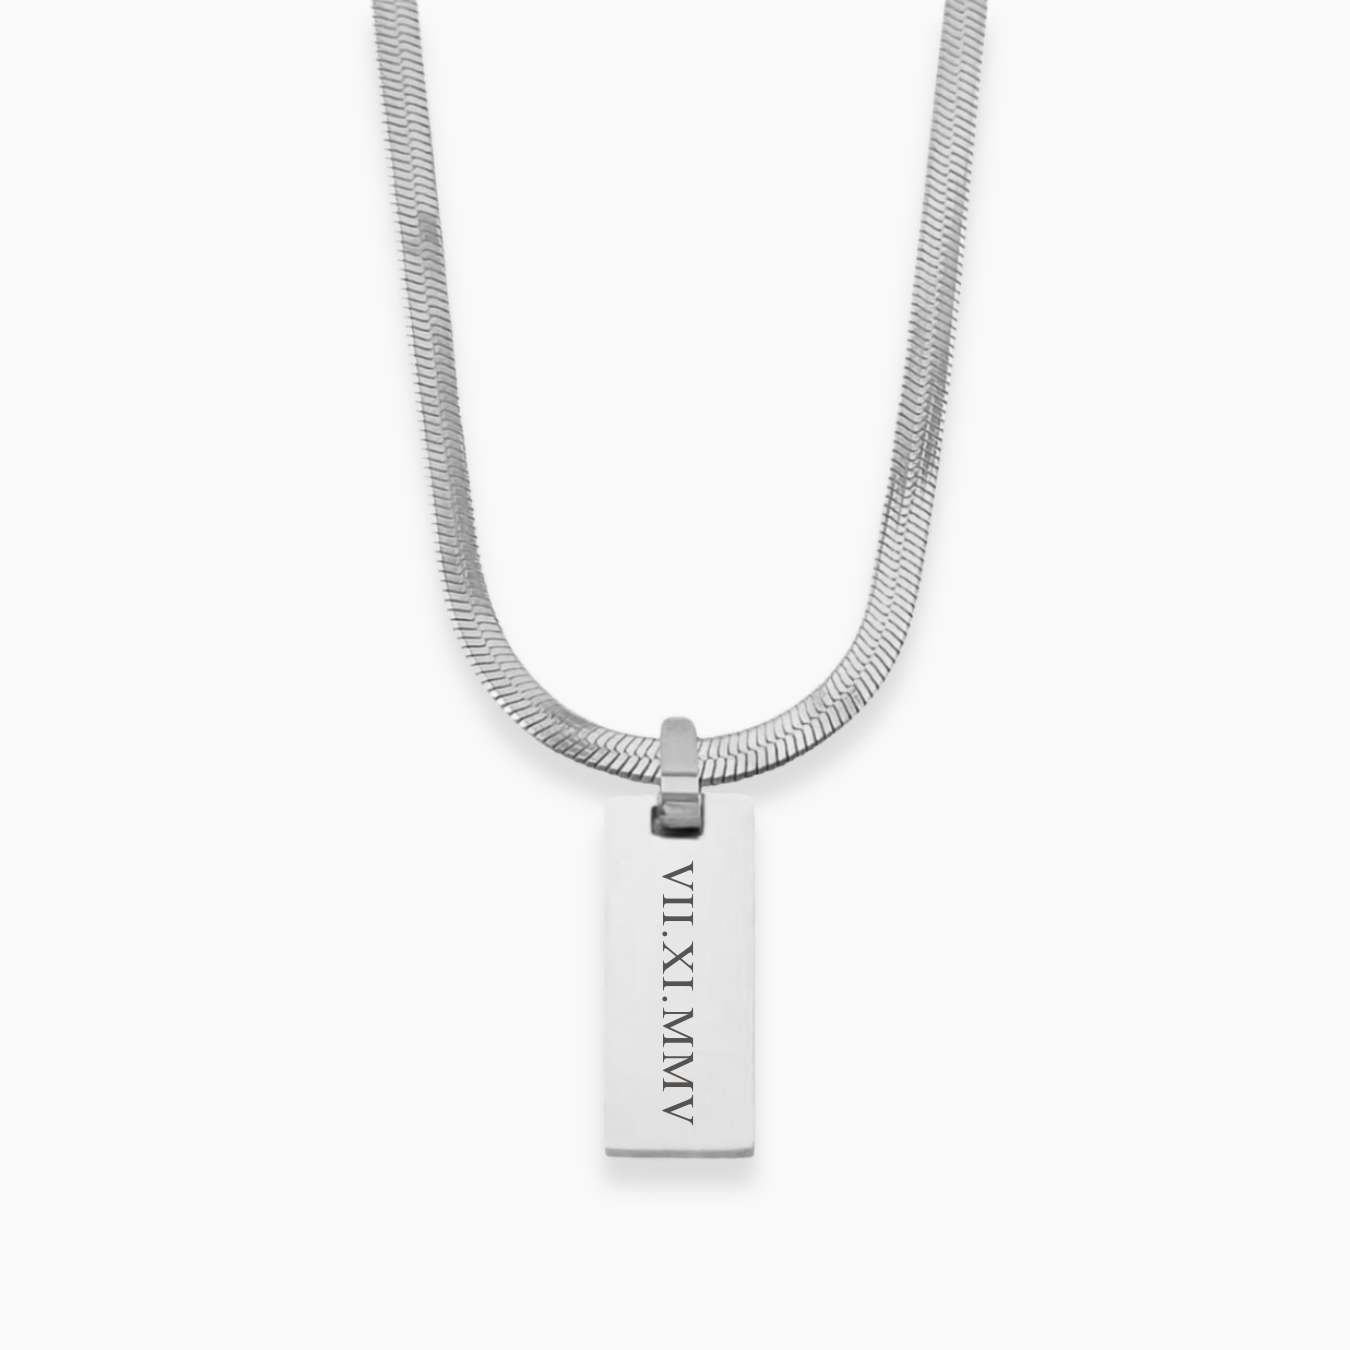 SILO Personalizable Necklace | Custom Text